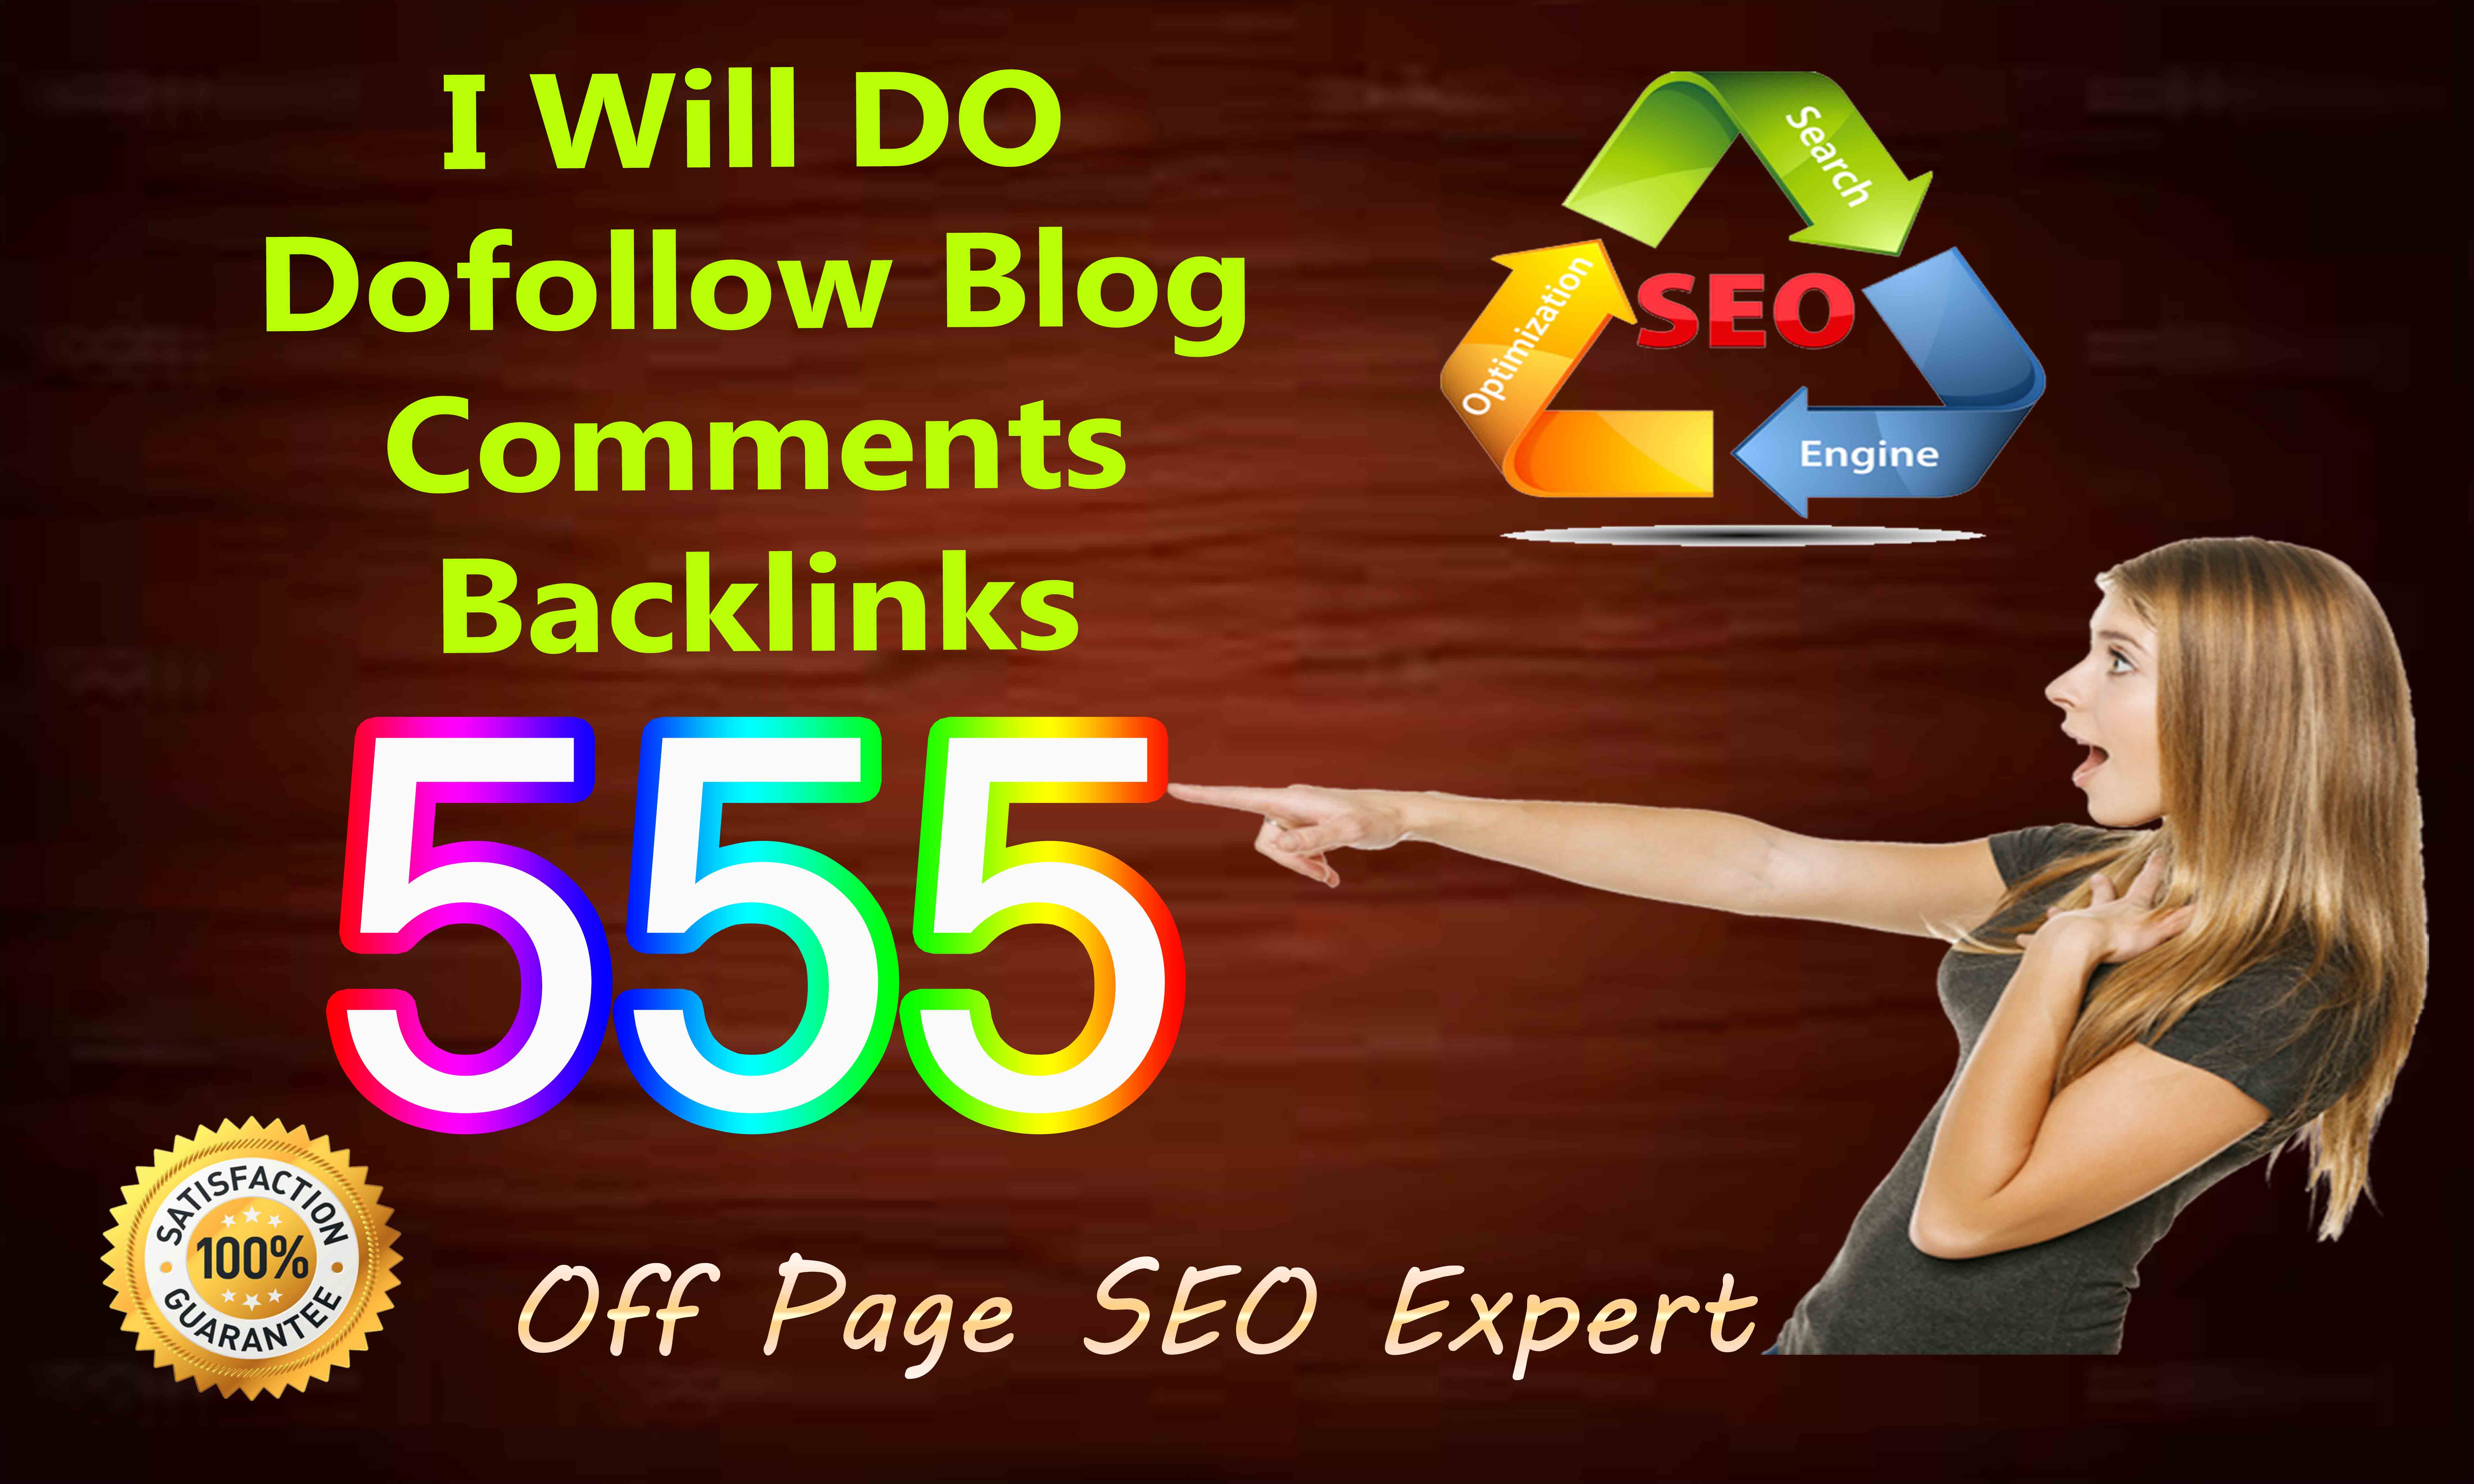 I will provide 555 high quality dofollow blog comment backlinks off page SEO